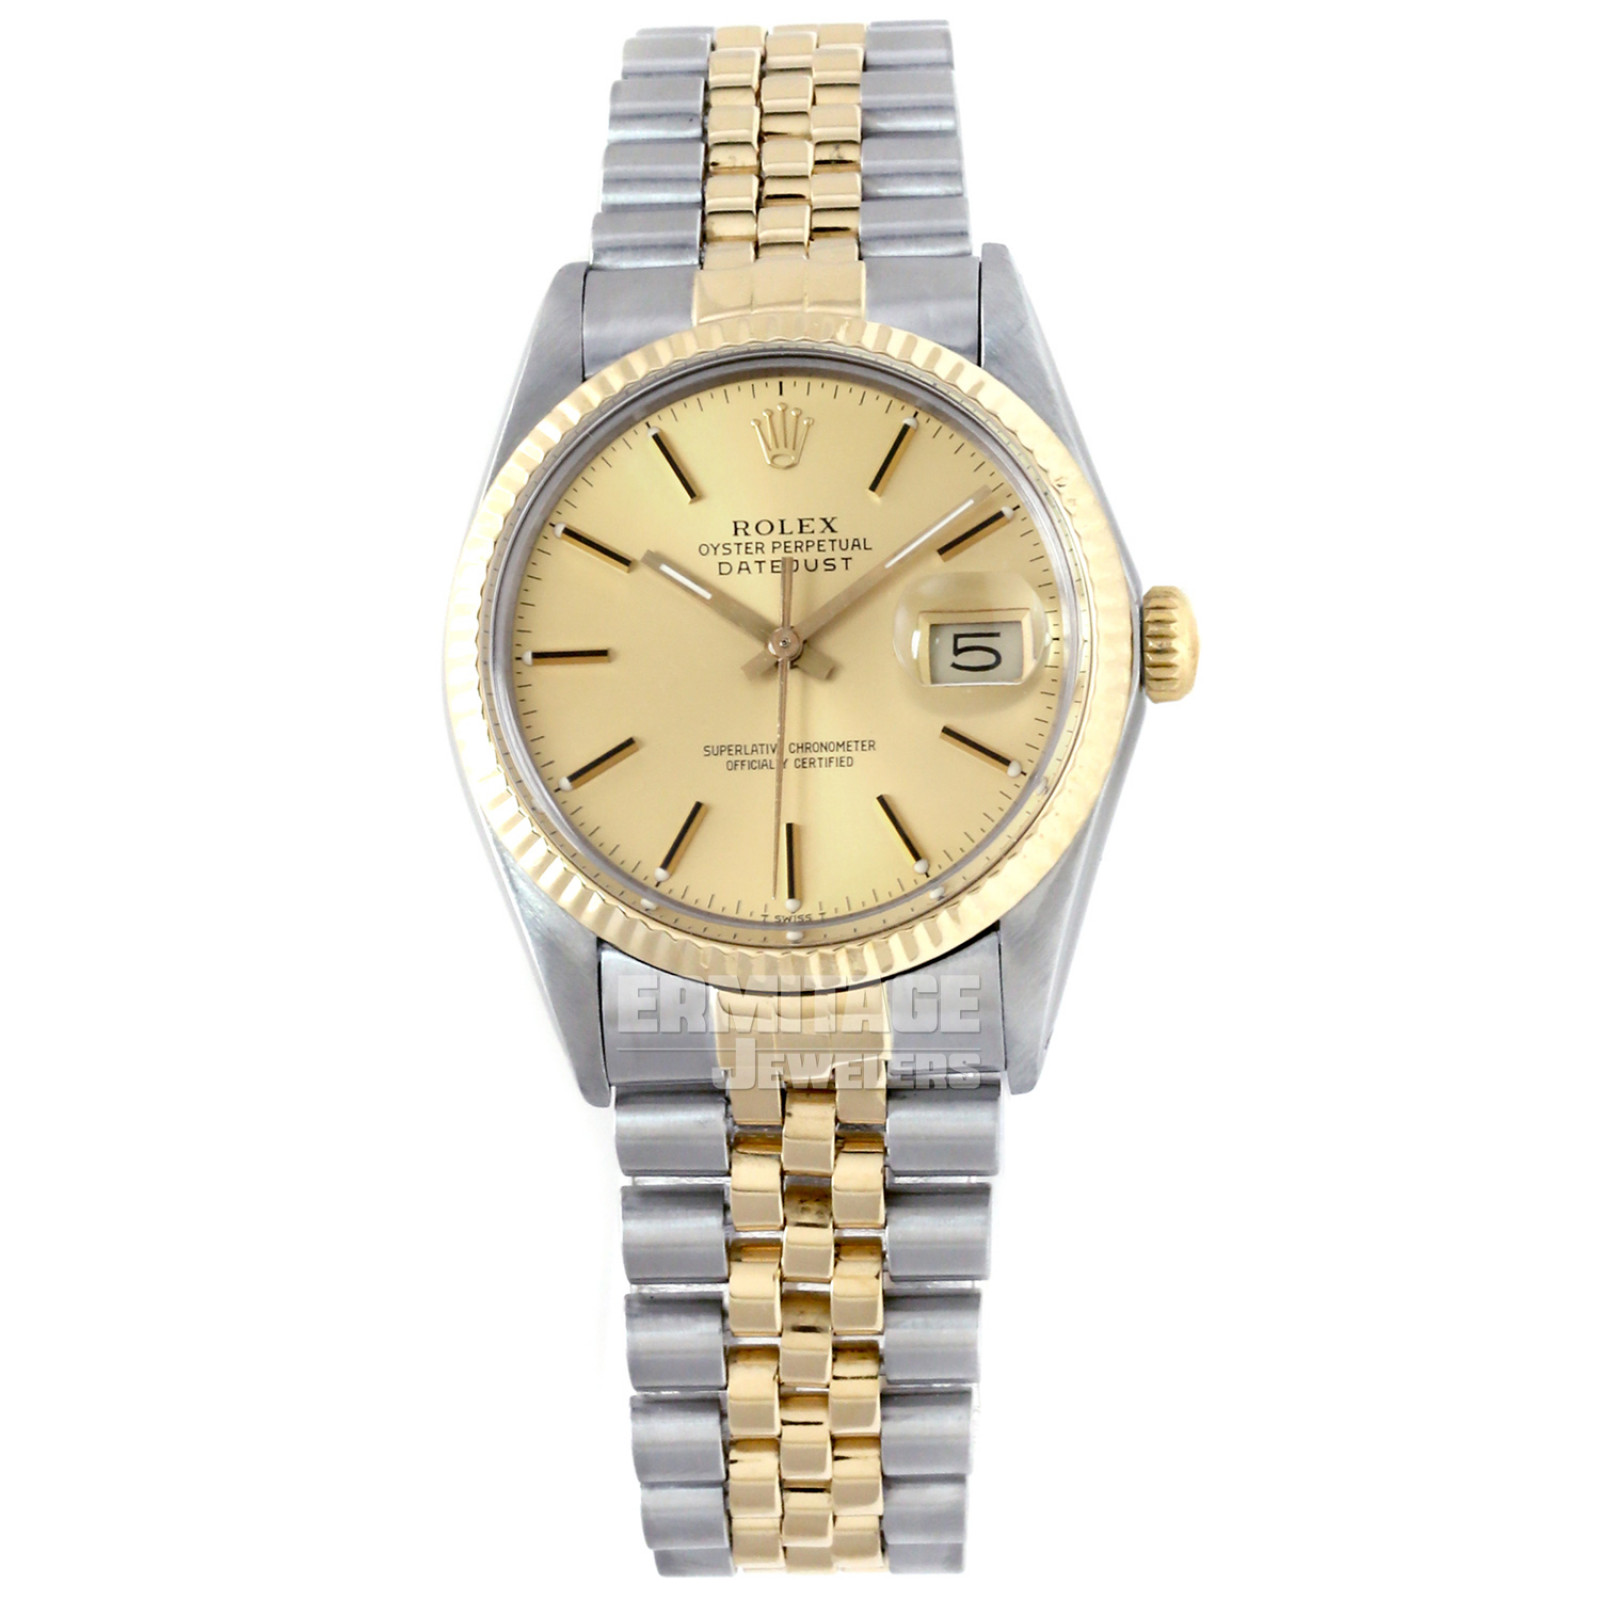 Sell Rolex Datejust 16013 with Champagne Dial